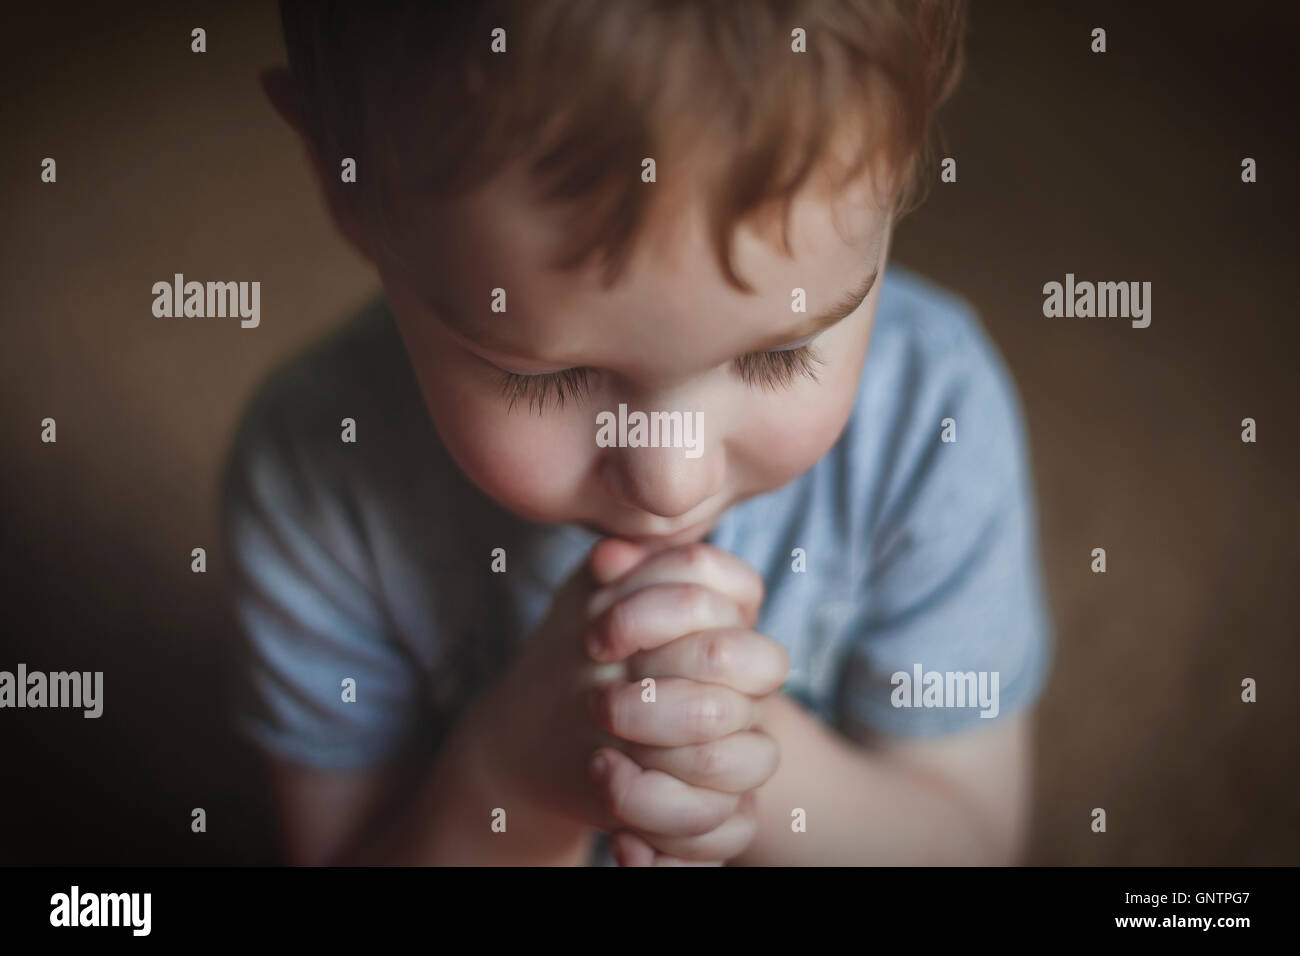 A cute young boy praying with hands clasped. Stock Photo